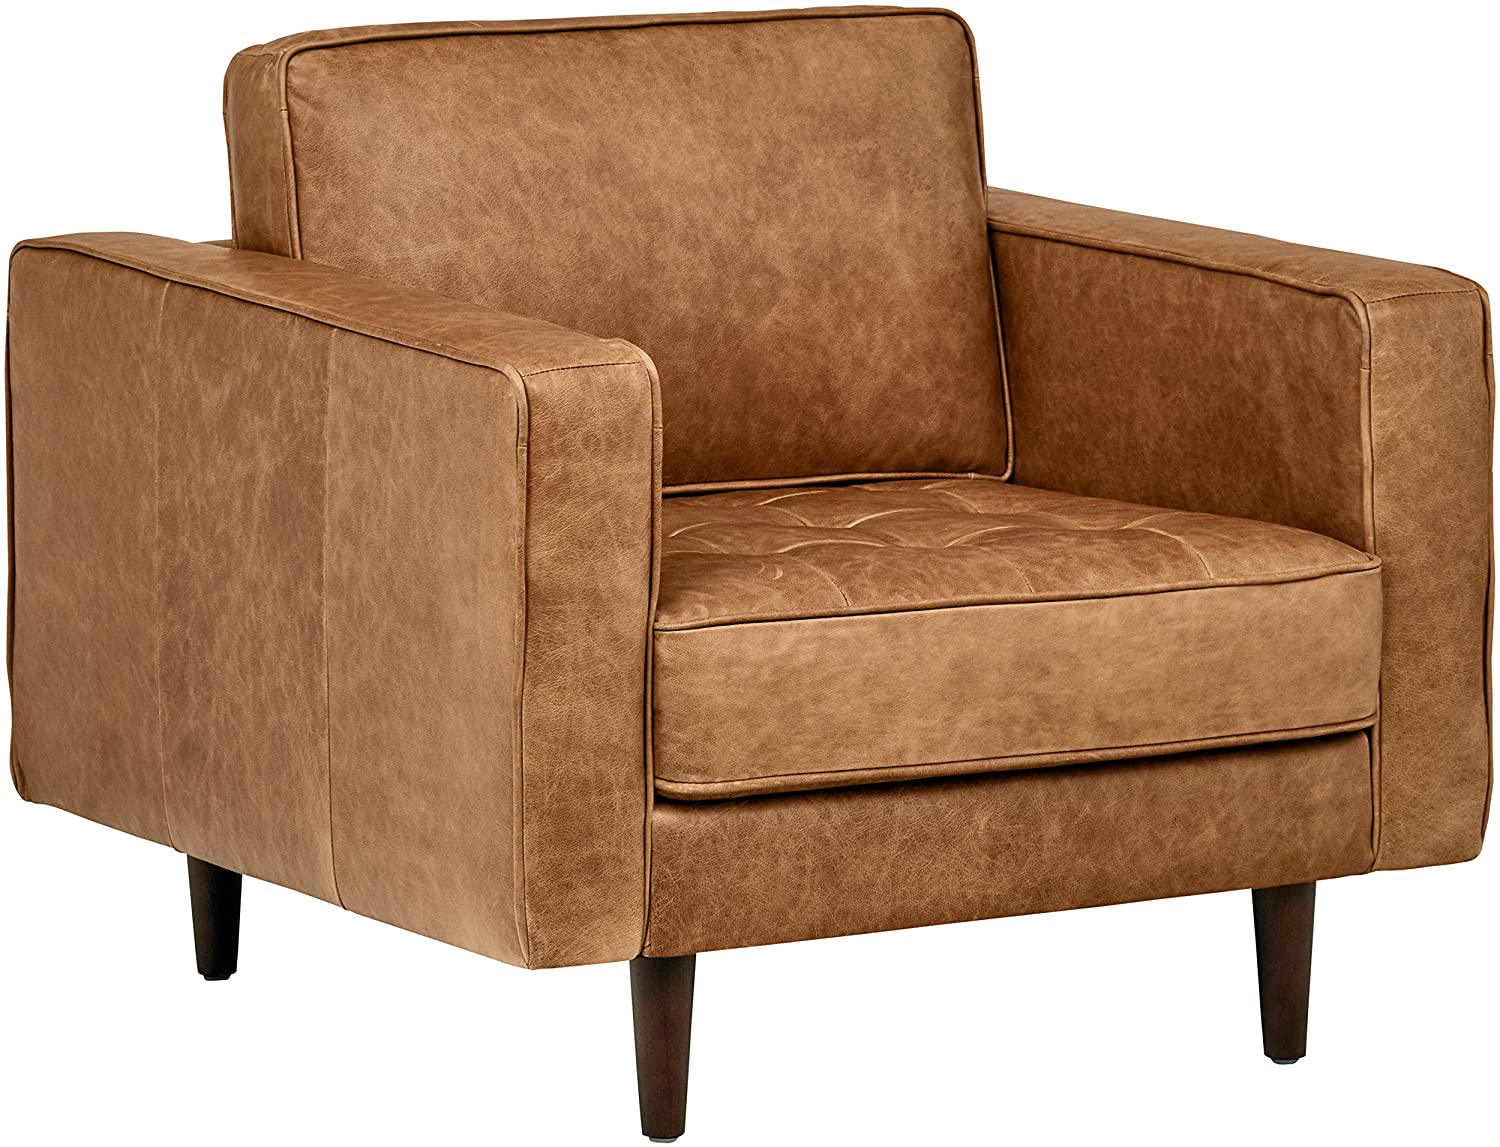 Rivet Tufted Mid-Century Modern Leather Accent Chair